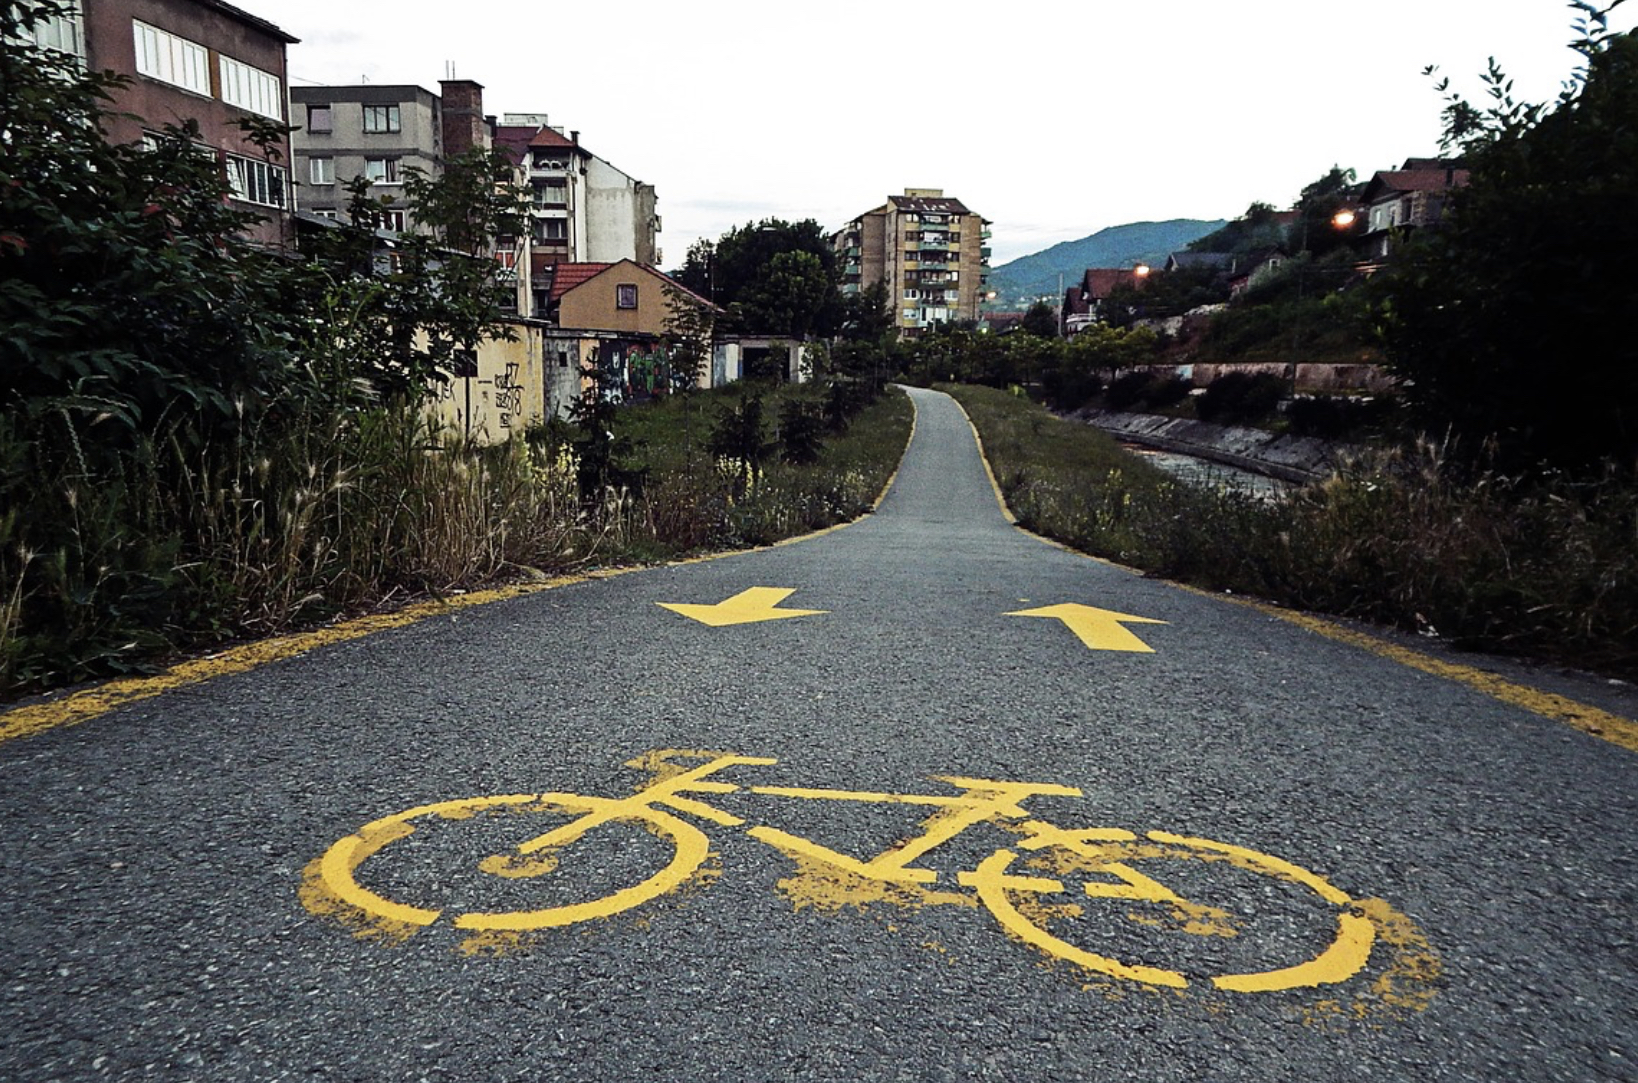 Cycle path for daily bike rides